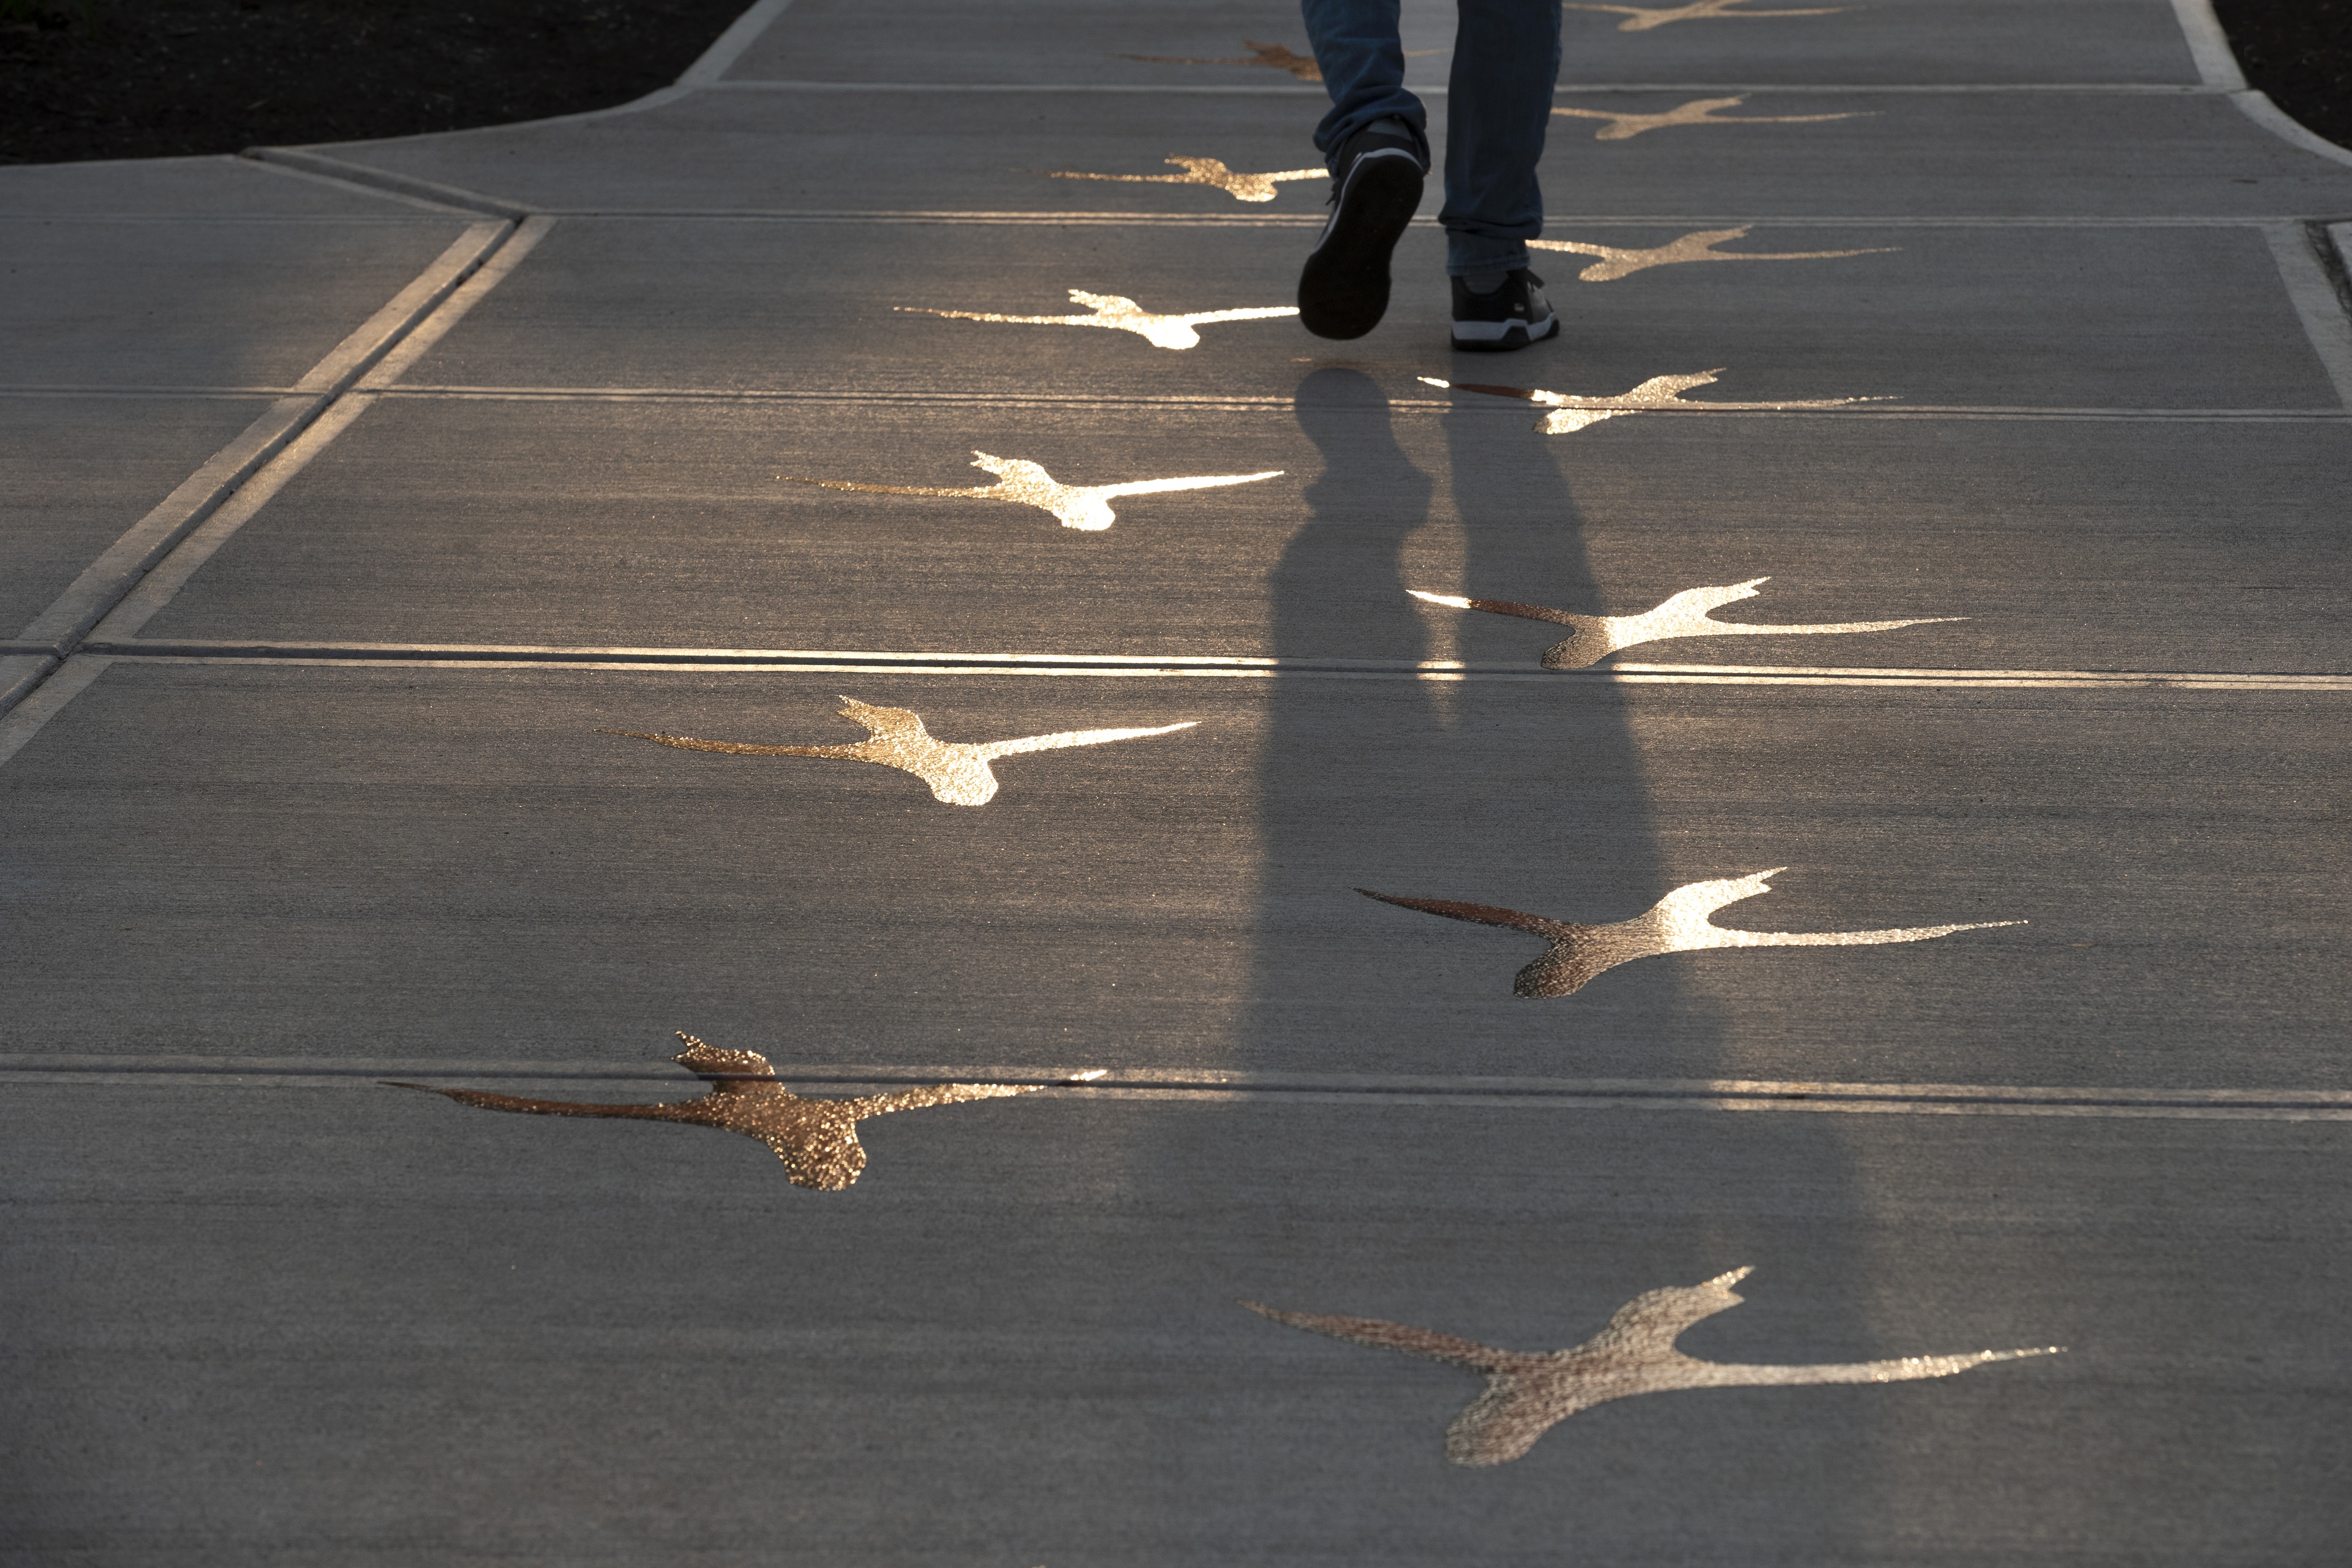 Student walking on campus on the falcon prints on a sidewalk